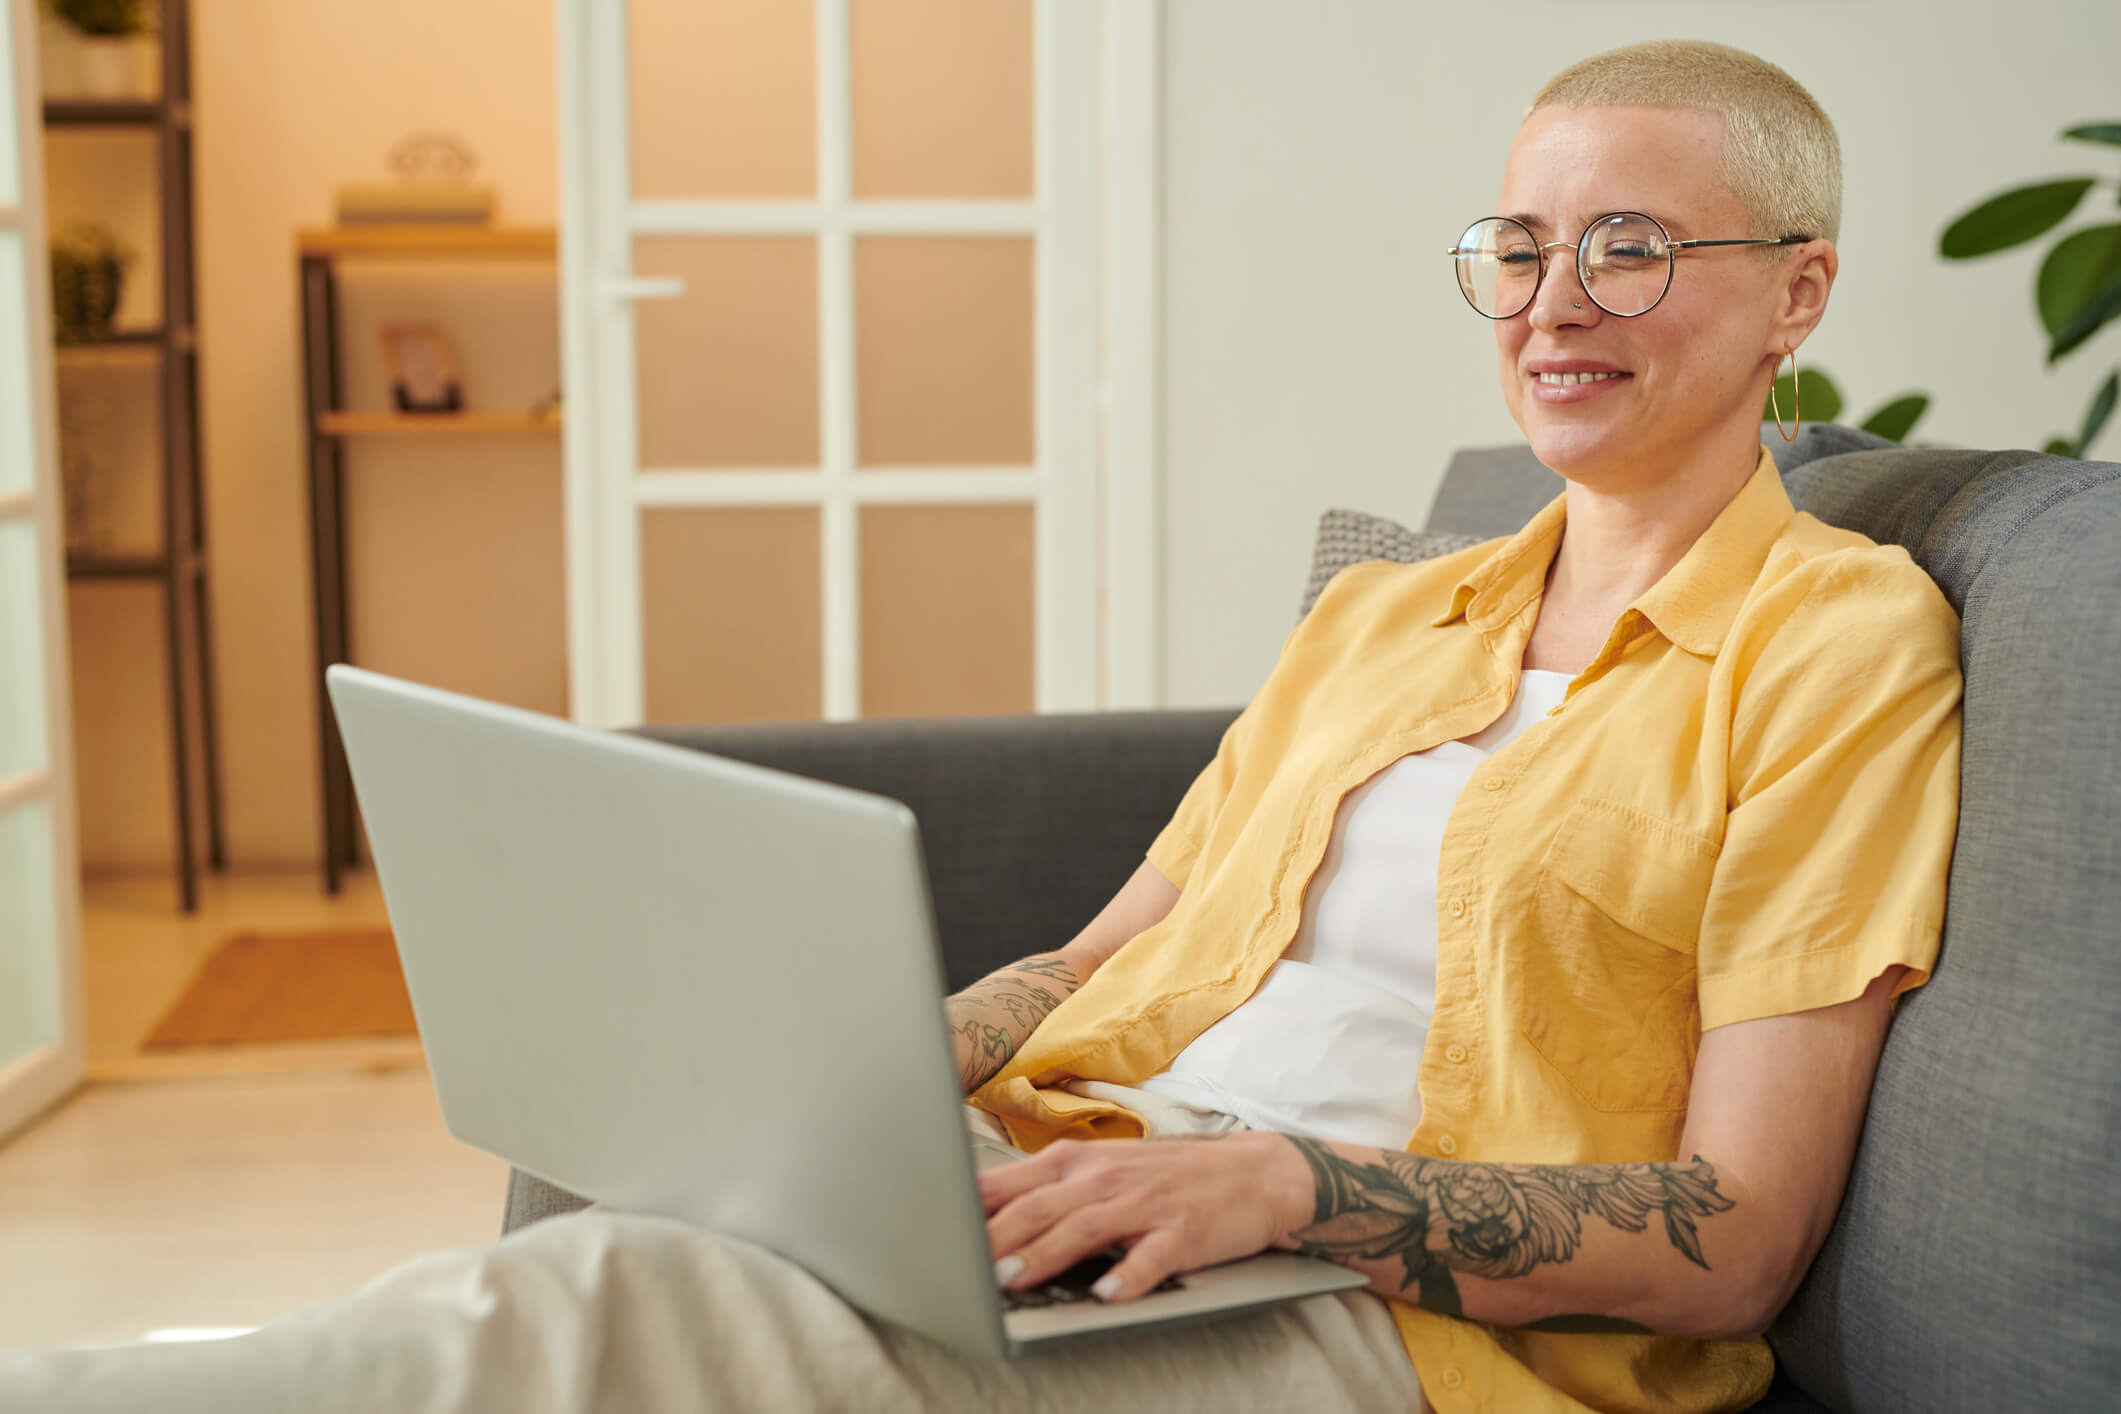 A person wearing glasses is sitting on a couch and using a laptop; they have a big smile on their face.